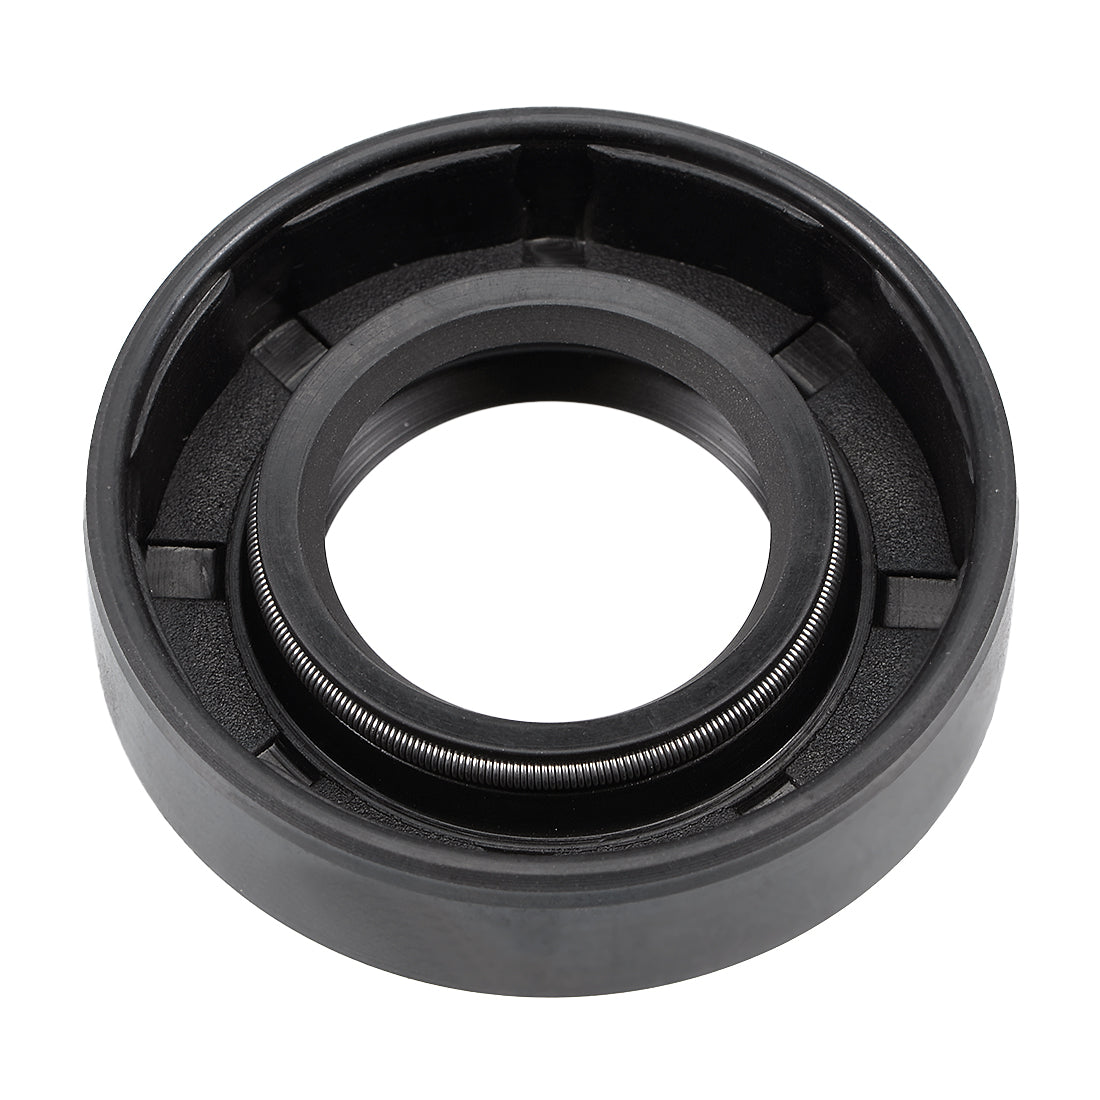 Uxcell Uxcell Oil Seal, TC 22mm x 34mm x 7mm, Nitrile Rubber Cover Double Lip